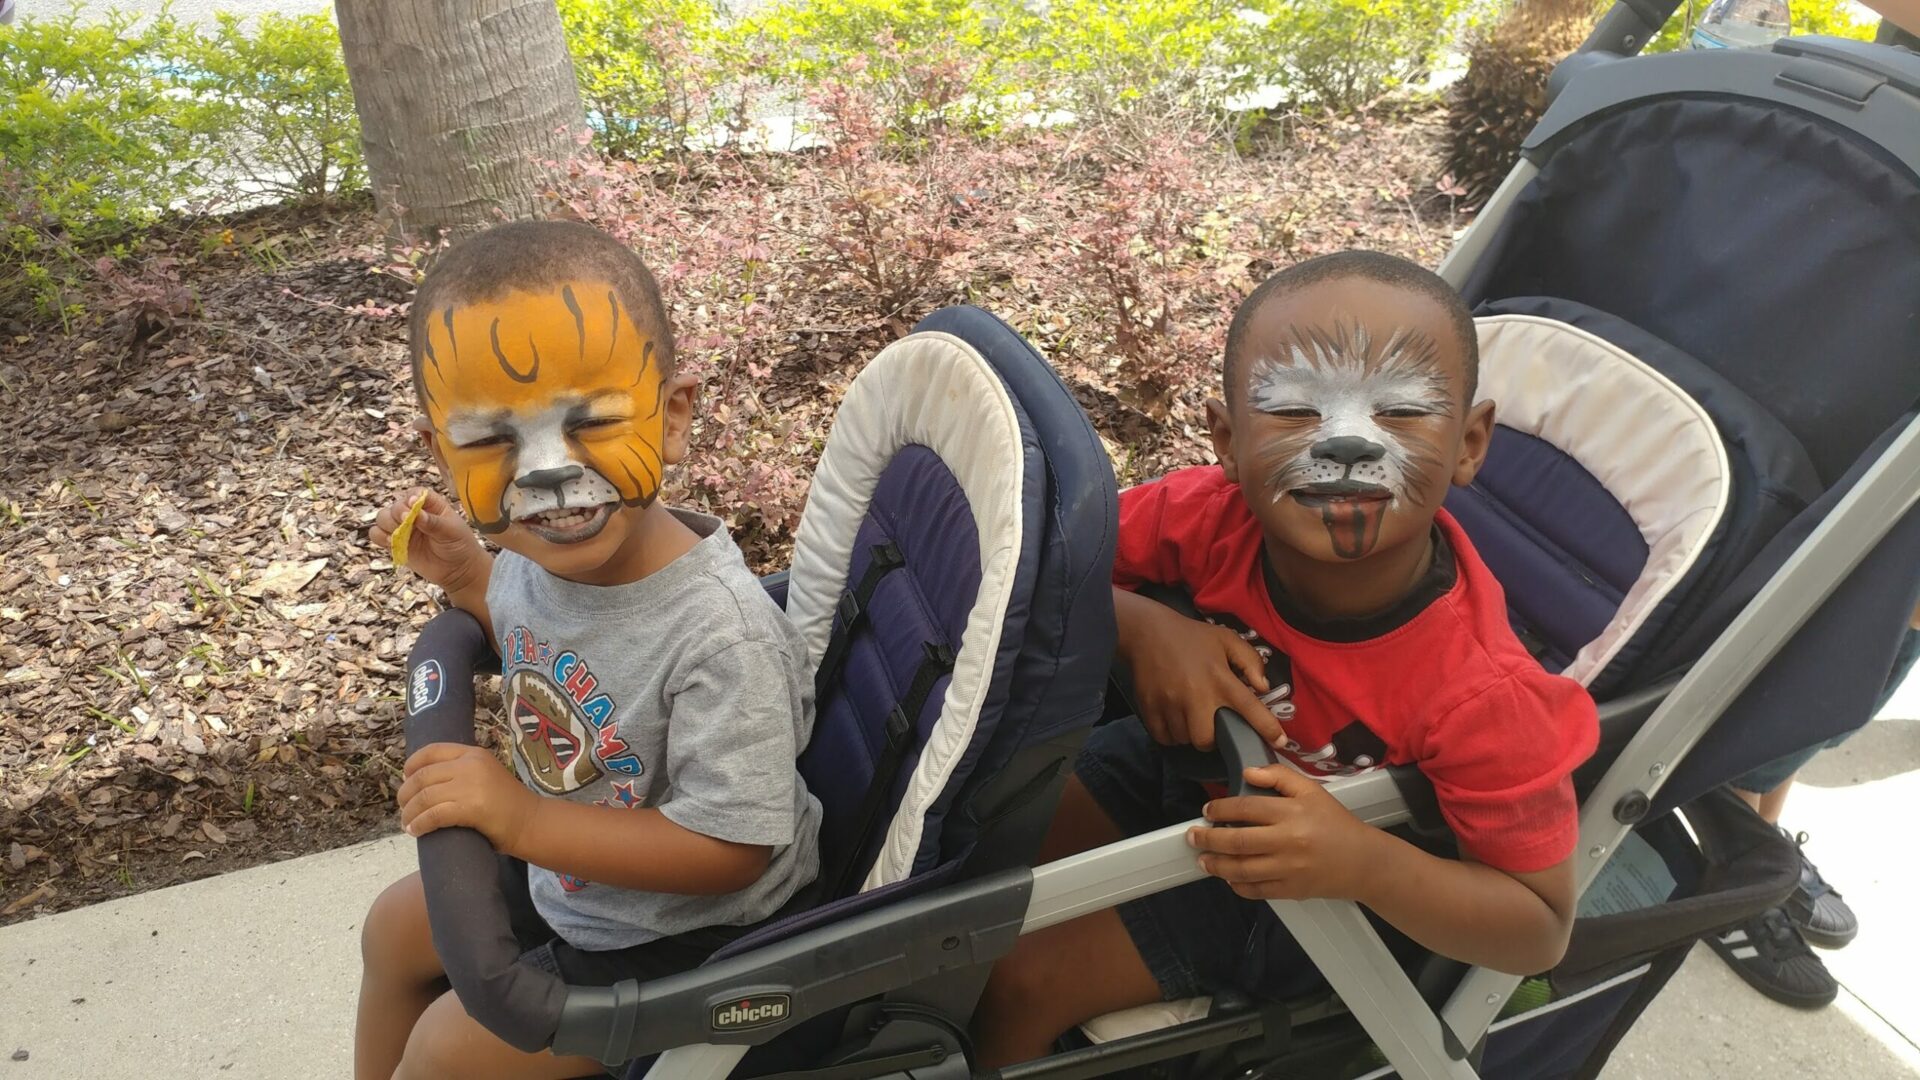 Two Boys With Animal Face Paint